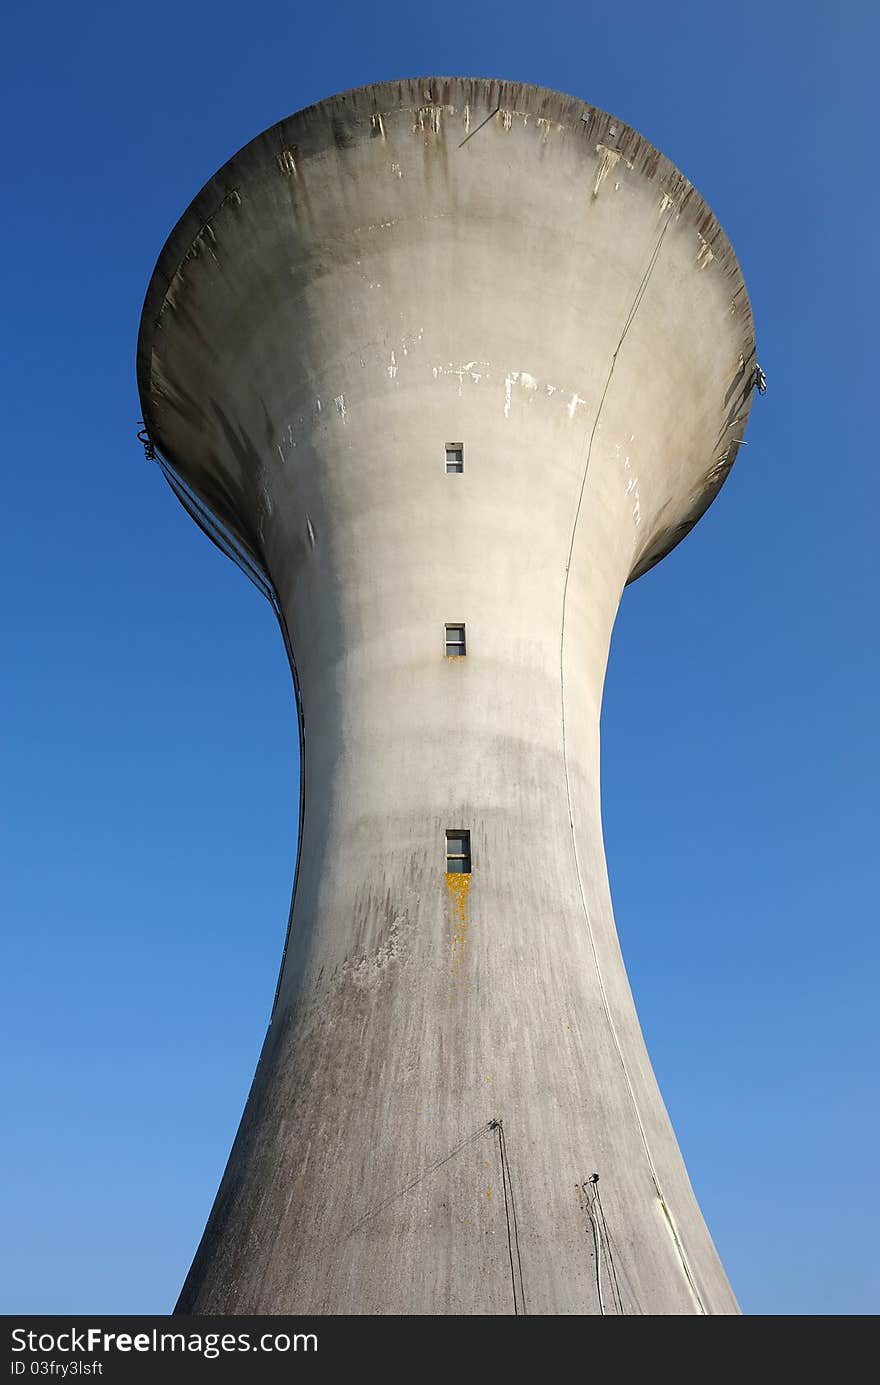 An old water tower in concrete. An old water tower in concrete